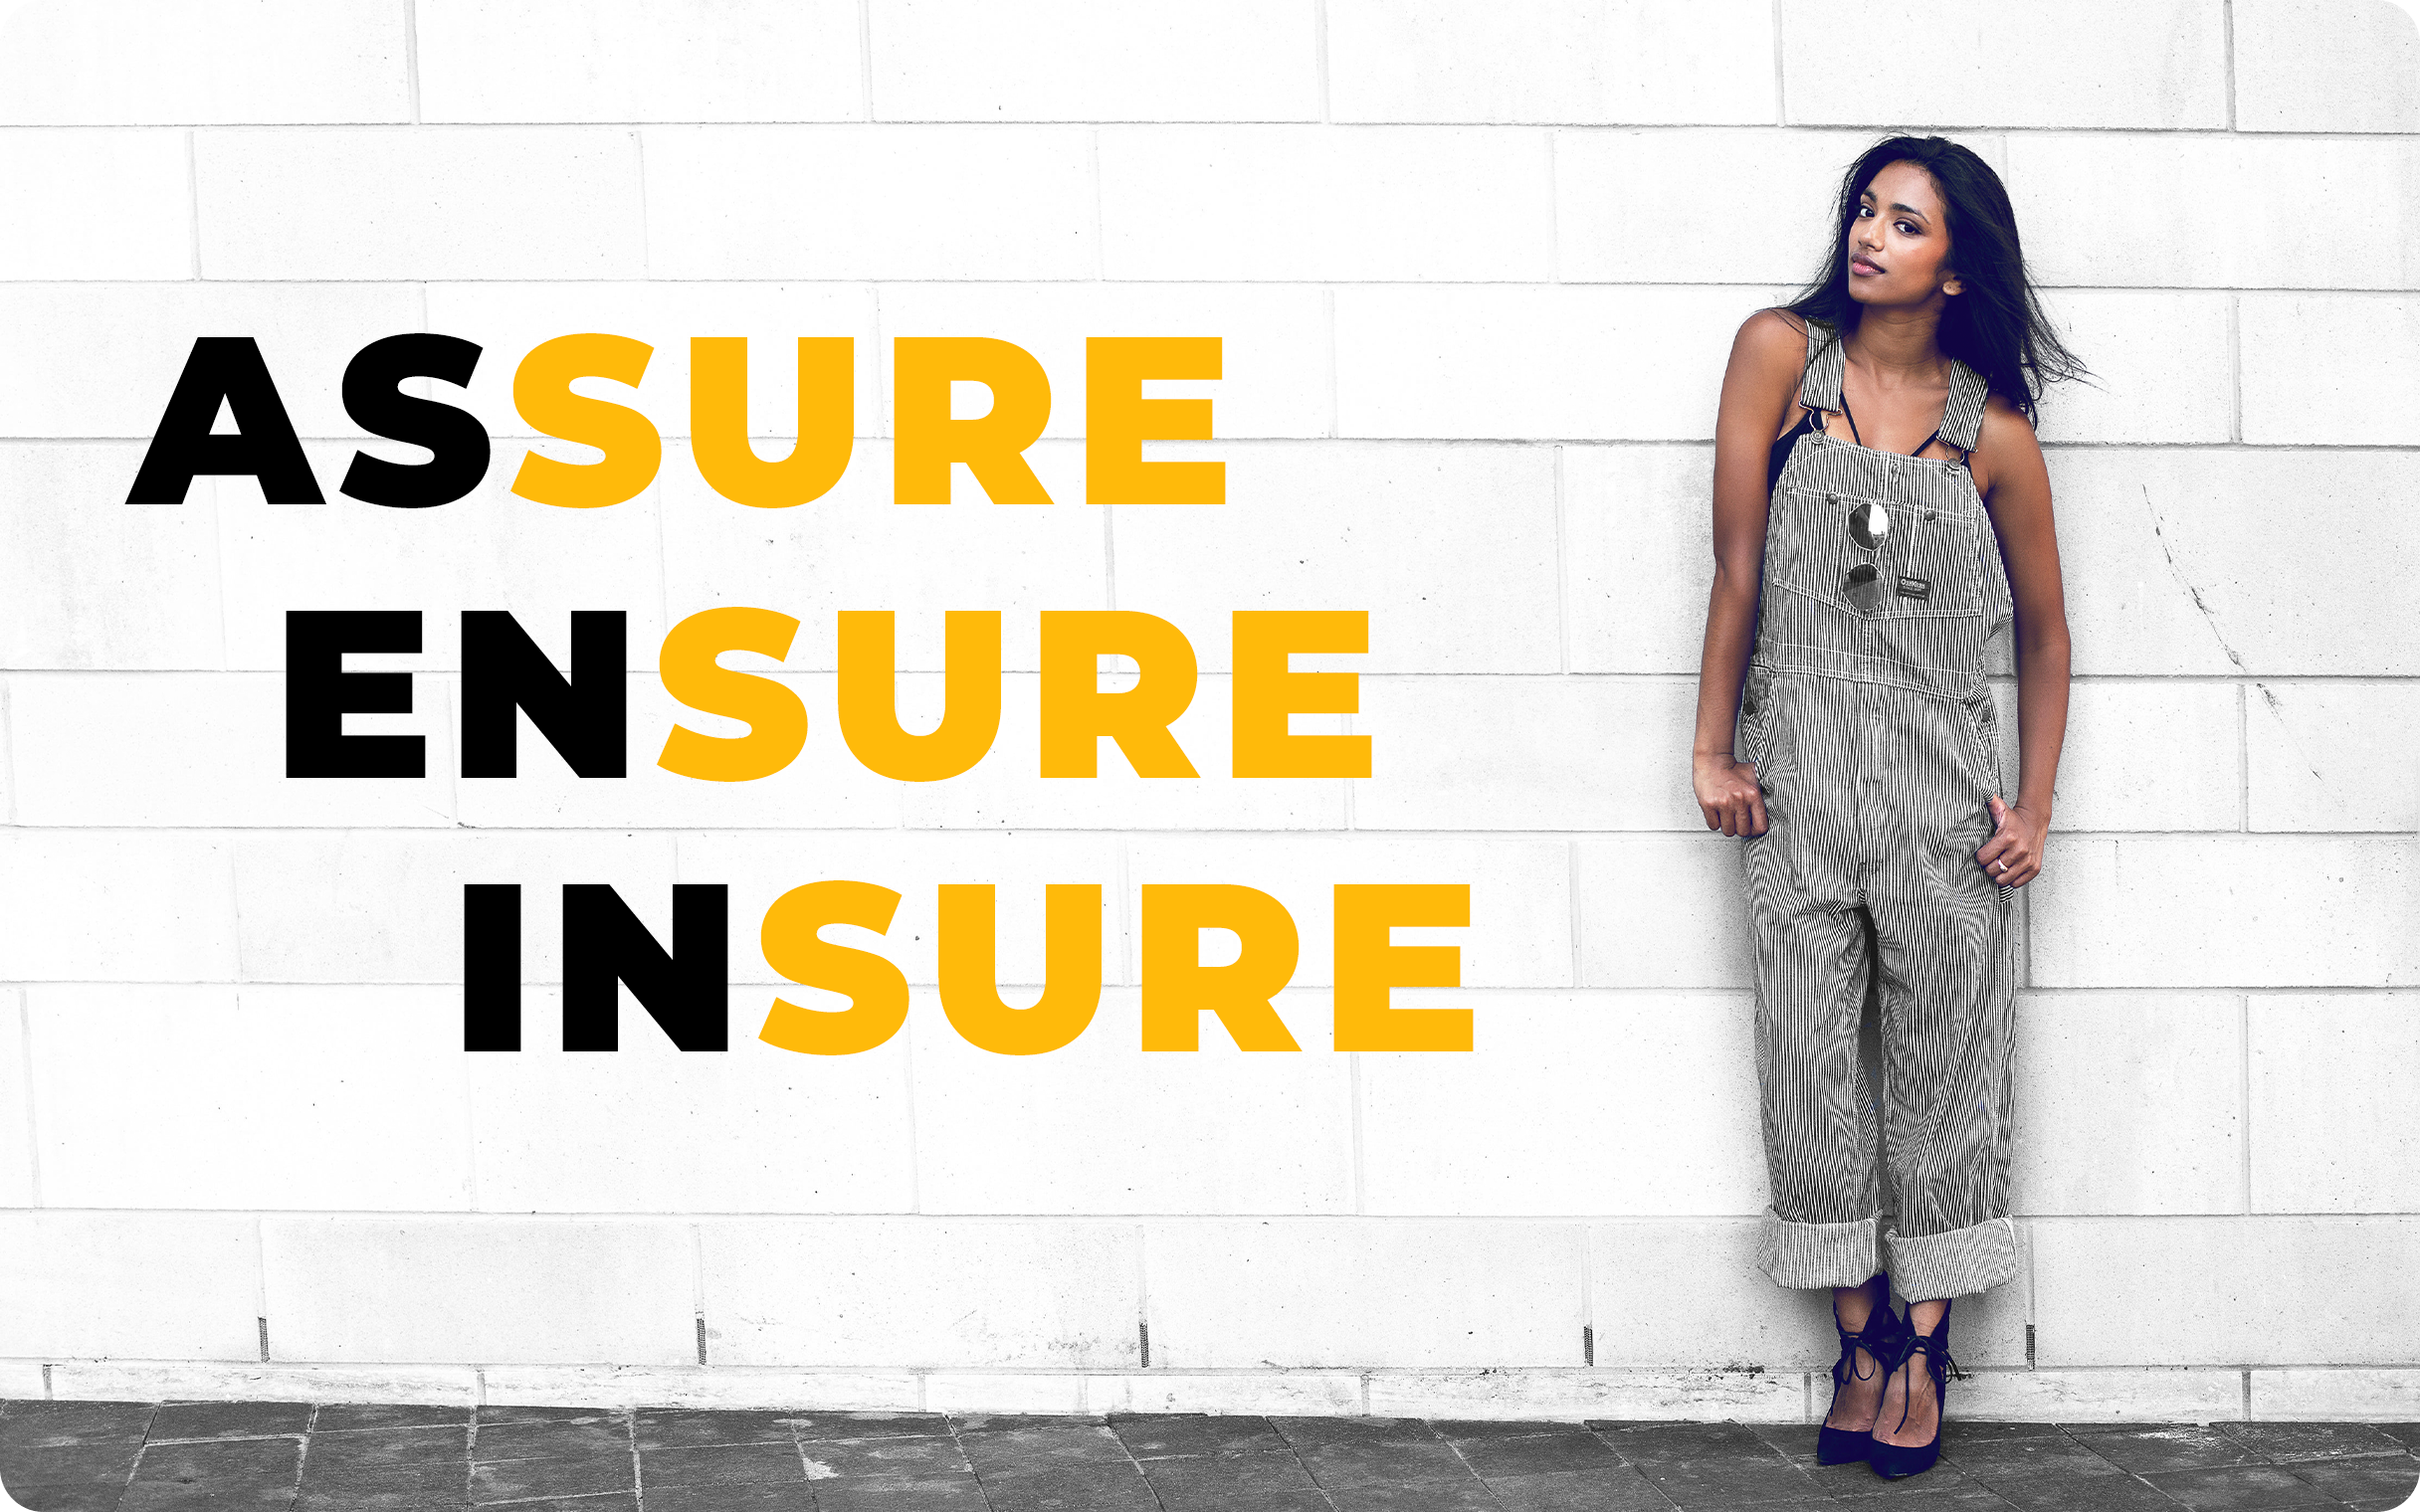 The difference between "assure," "ensure," and "insure"